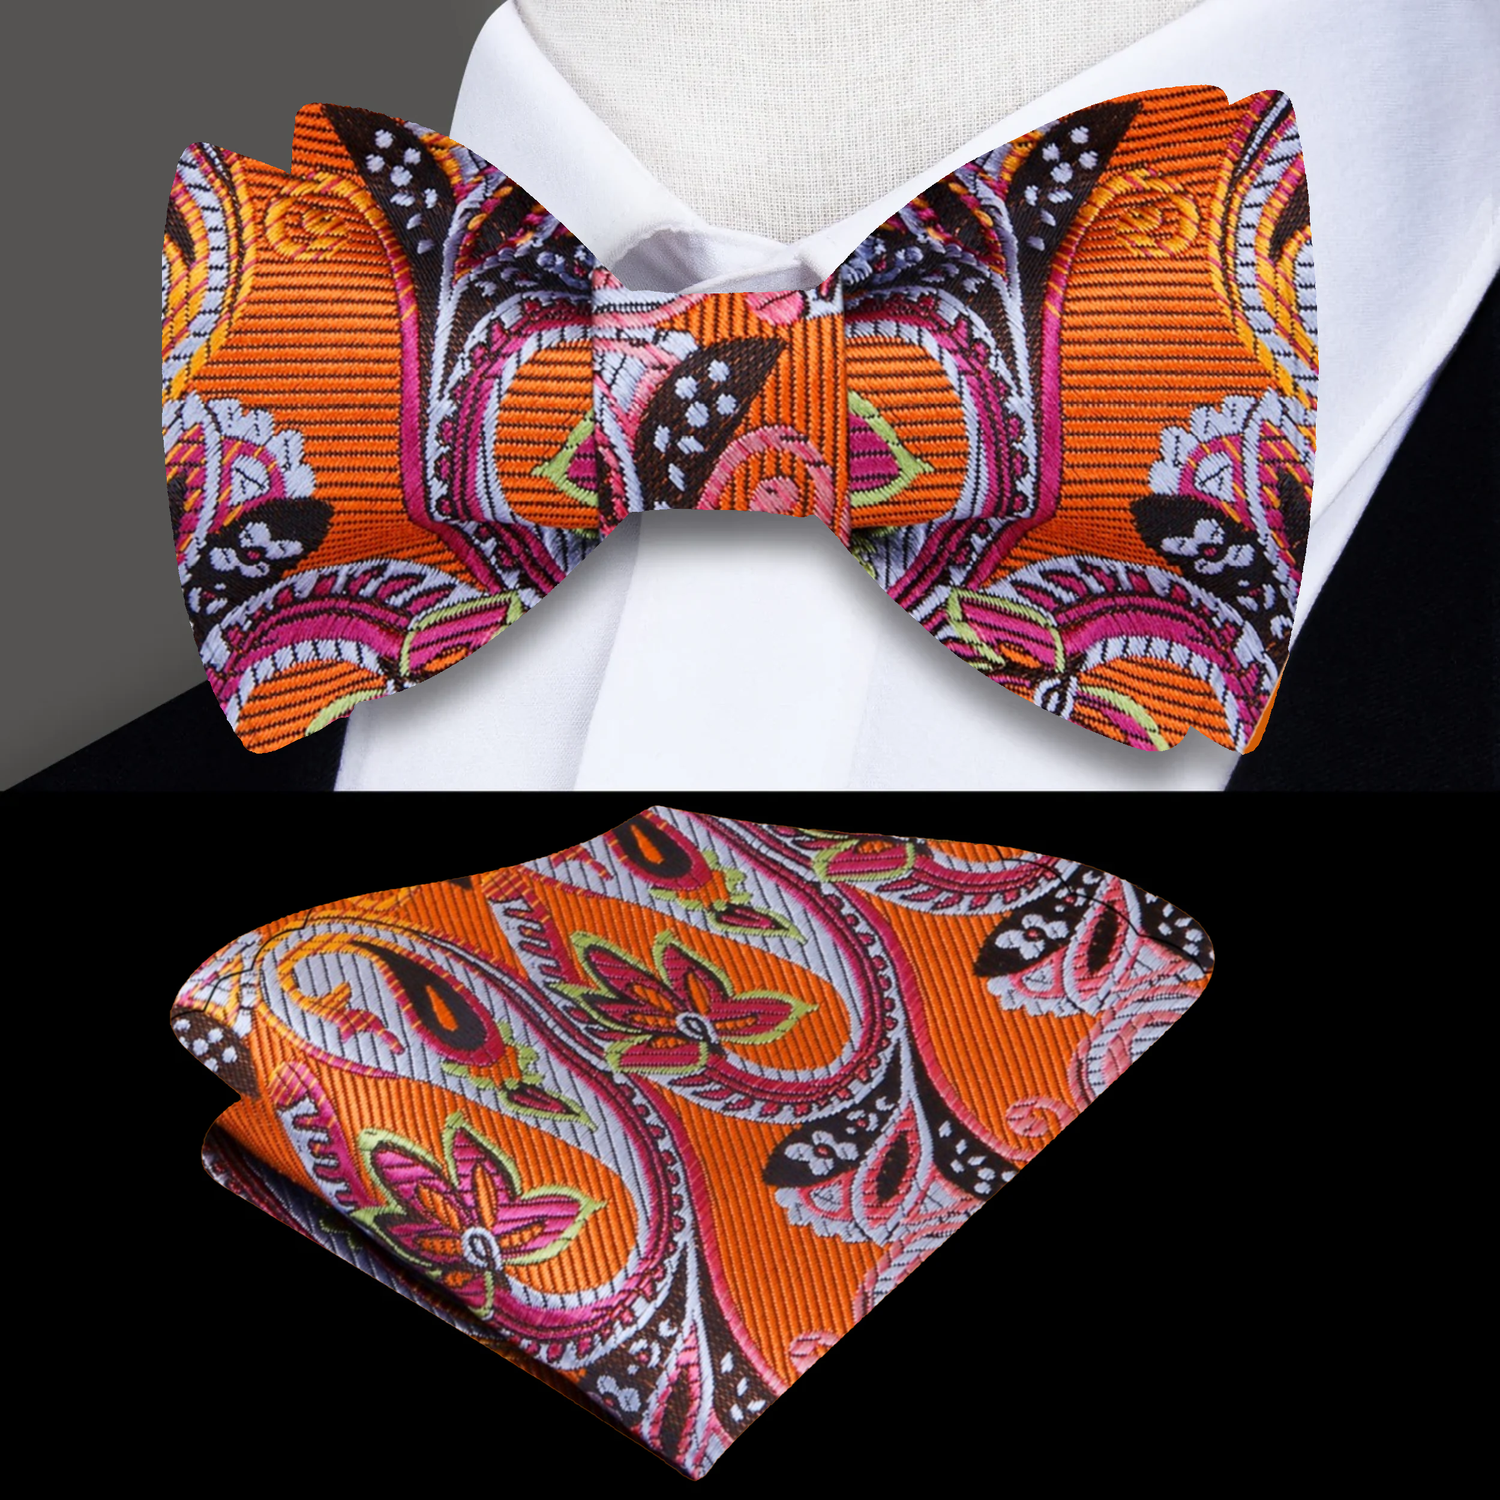 An Orange Intricate Floral with Paisley Pattern Silk Self Tie Bow Tie, Matching Pocket Square